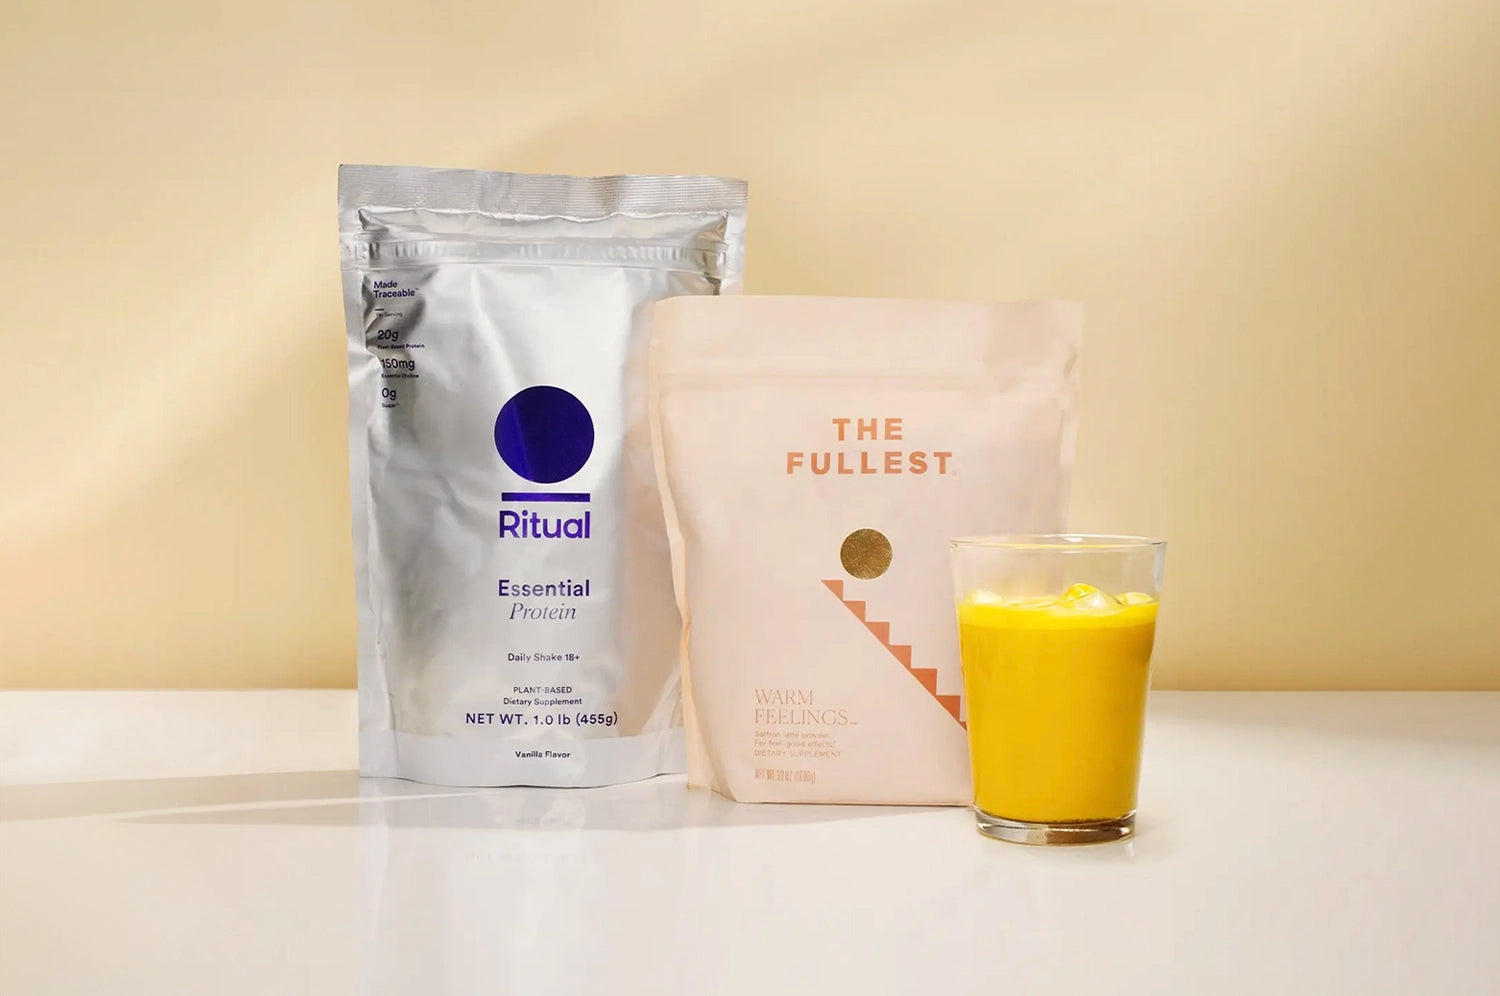 An image of The Fullest Warmest Feelings bag and a bag of Rituals Essential Protein Powder against an orange-blush toned background, with a saffron protein smoothie in a clear glass in the foreground.